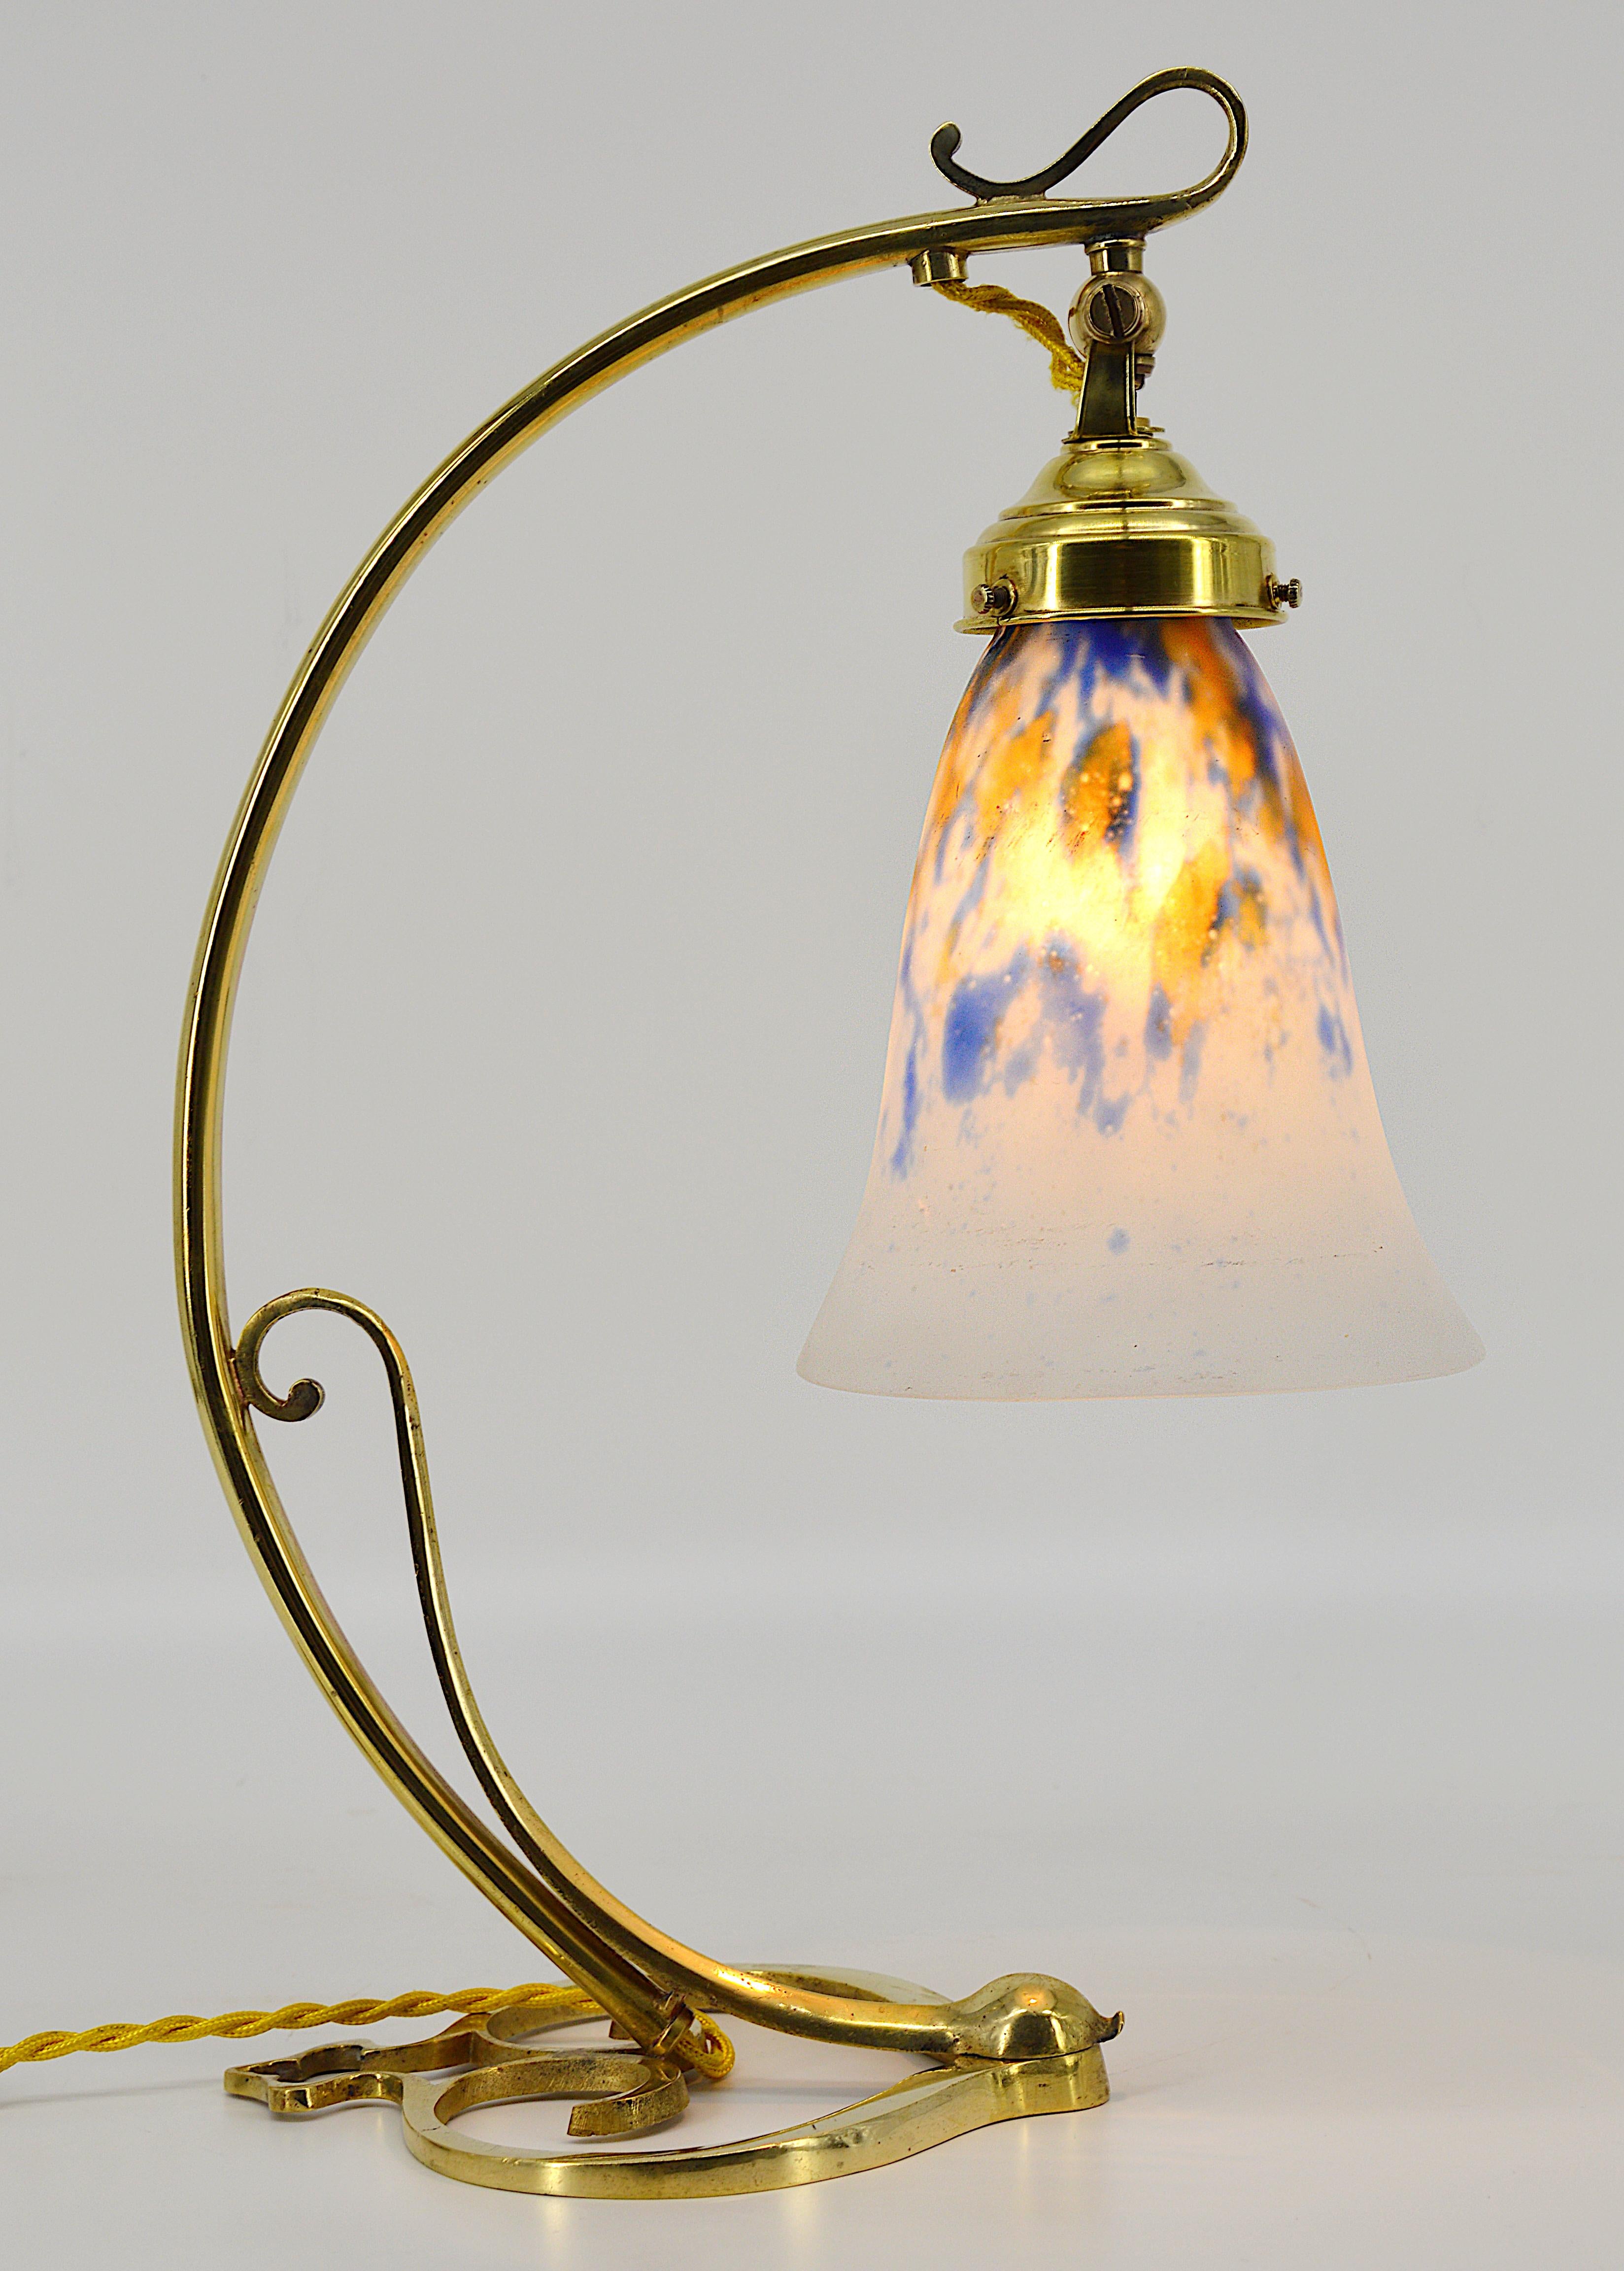 French Art Deco / Nouveau table lamp, Nancy, France, circa 1920. Blown double glass shade by Daum hung at its solid bronze fixture. Measures: Height 15.2